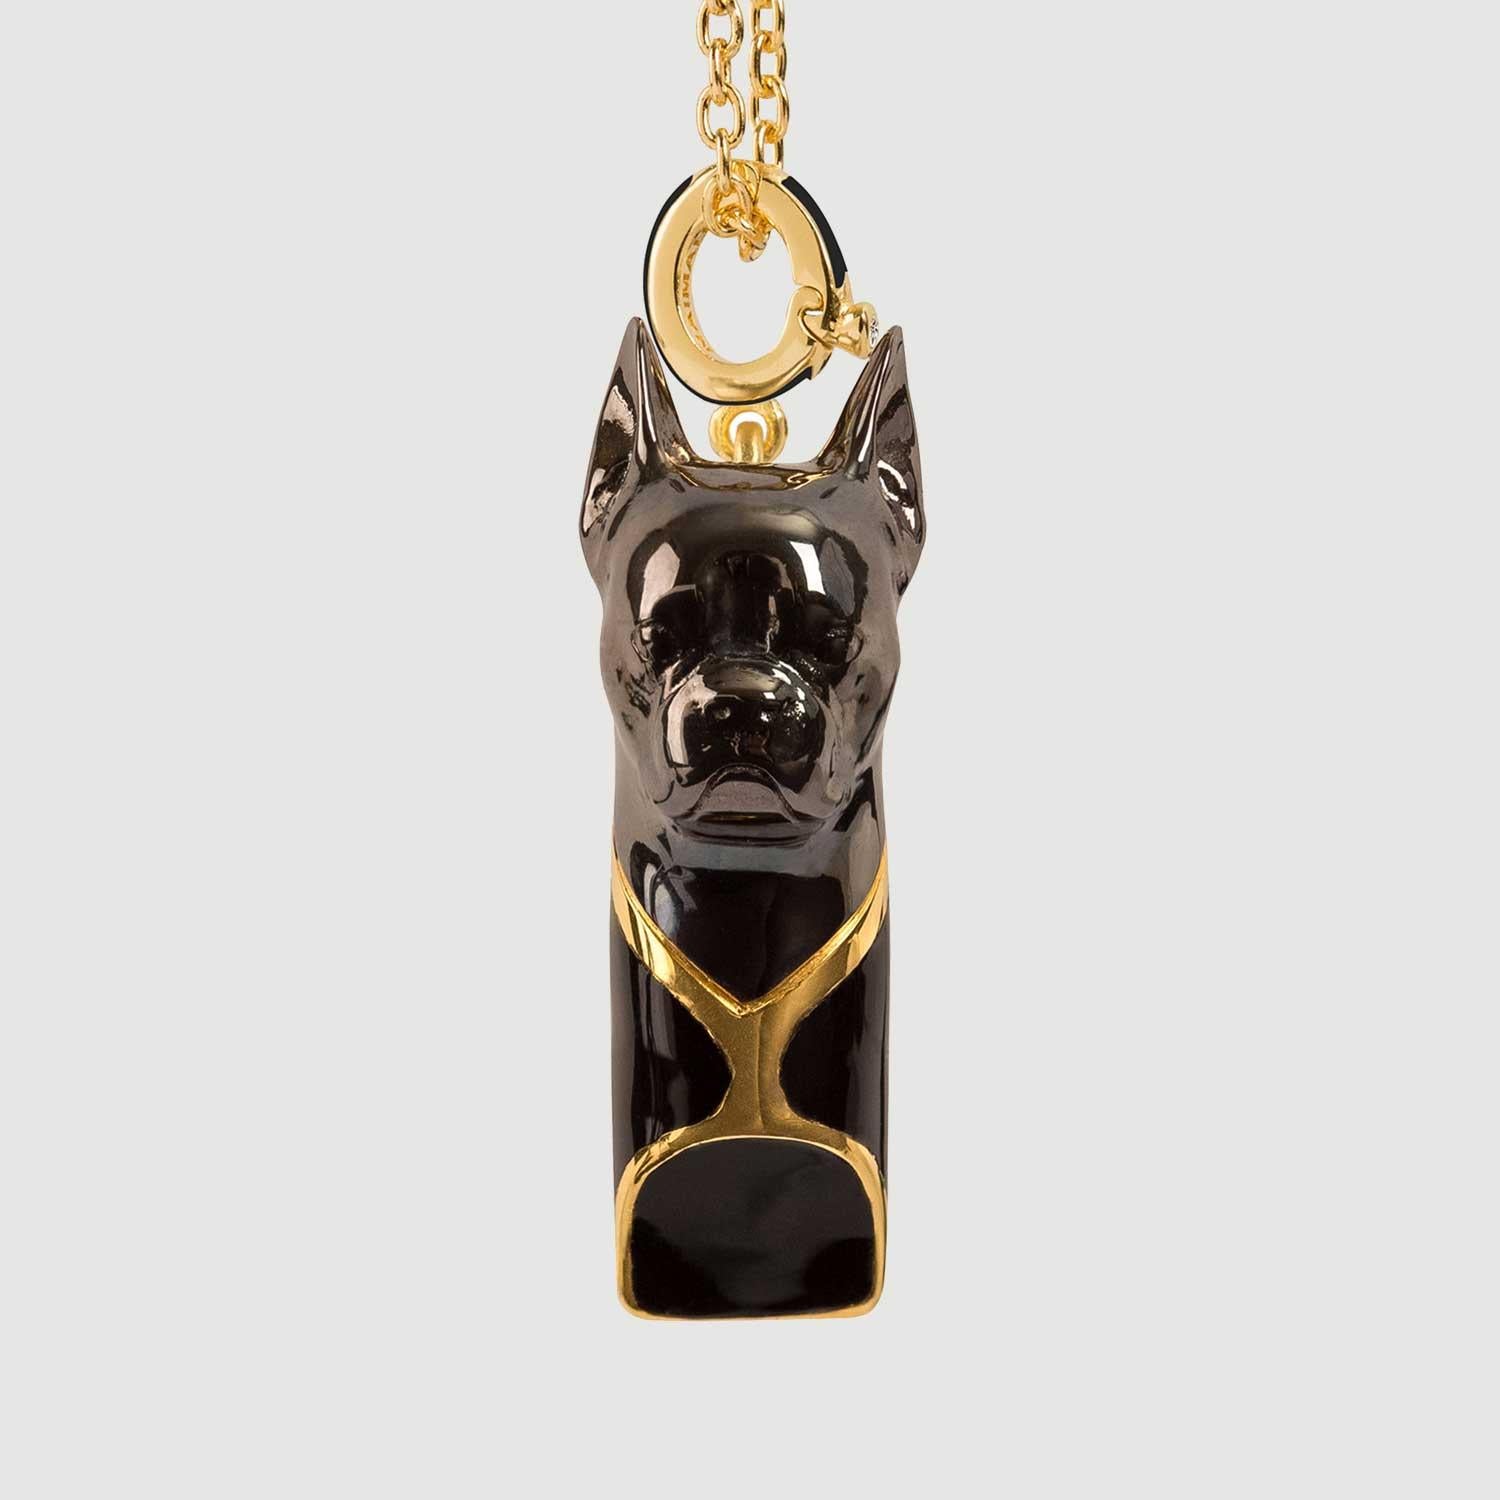 Introducing our exquisite French Bulldog Whistle Pendant Necklace, a stunning piece of jewelry that combines elegance, functionality, and a touch of whimsy. Handcrafted with meticulous attention to detail, this pendant is inspired by Georges